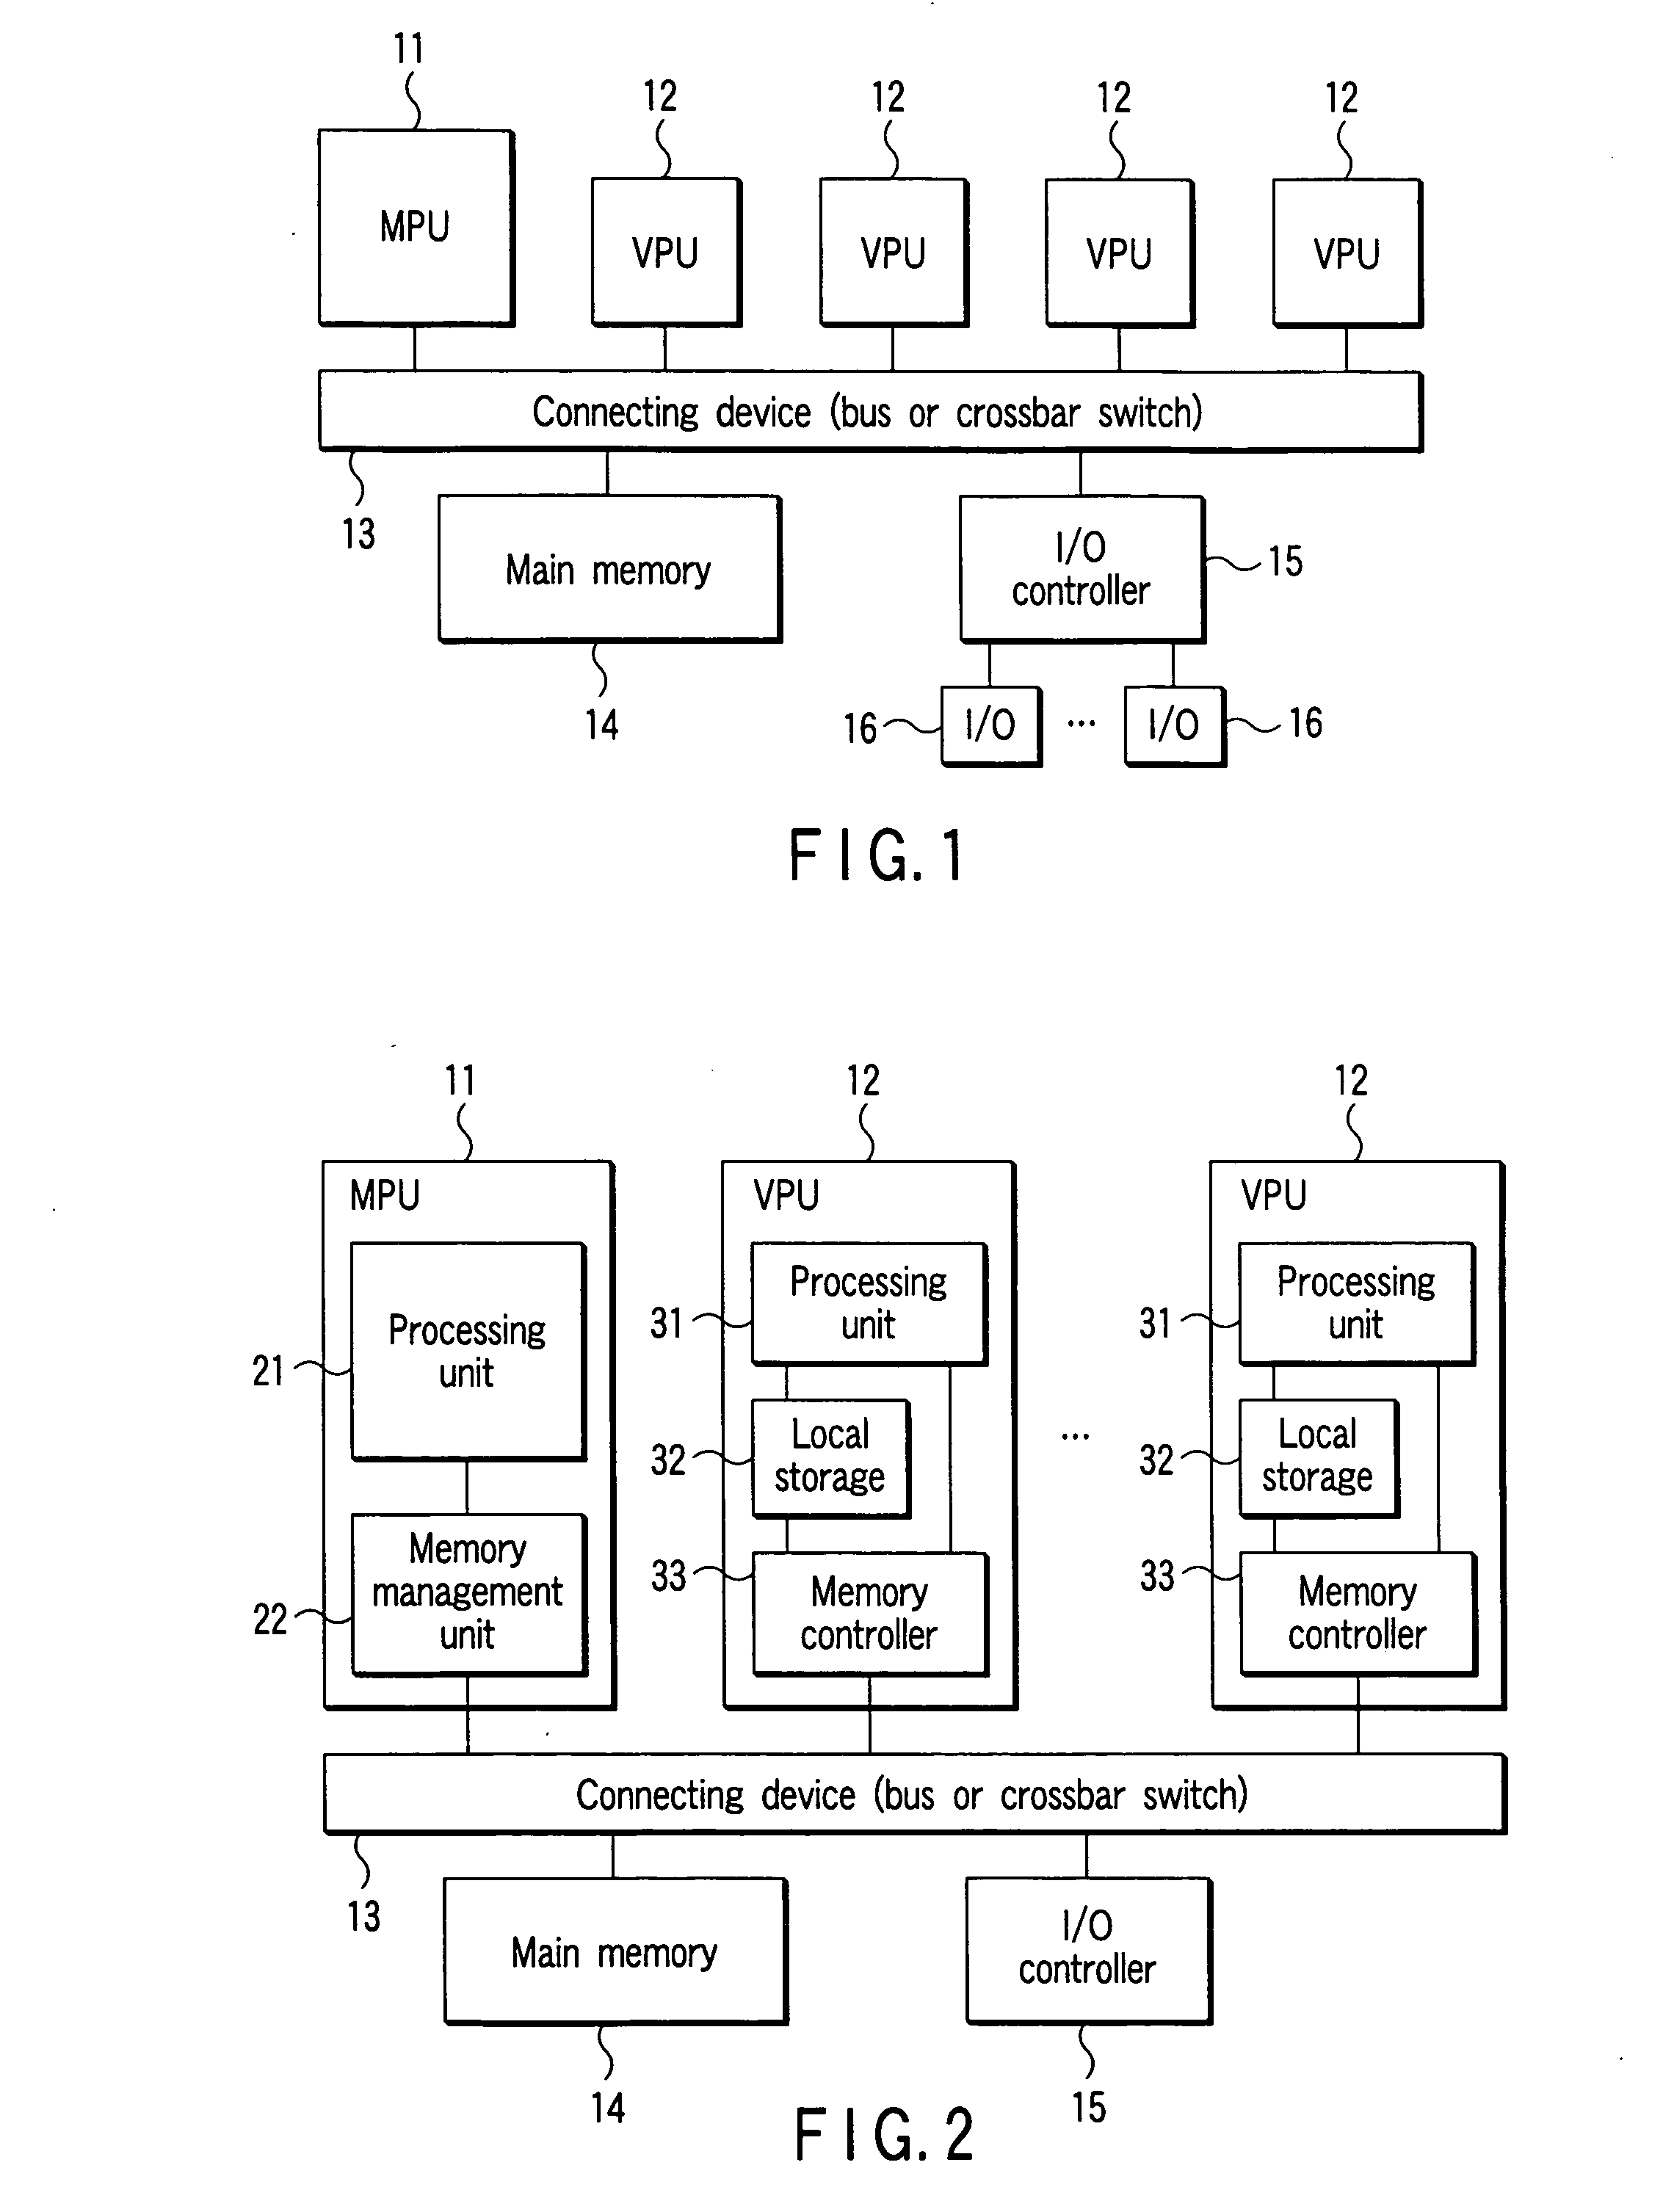 Method and system for performing real-time operation using processors